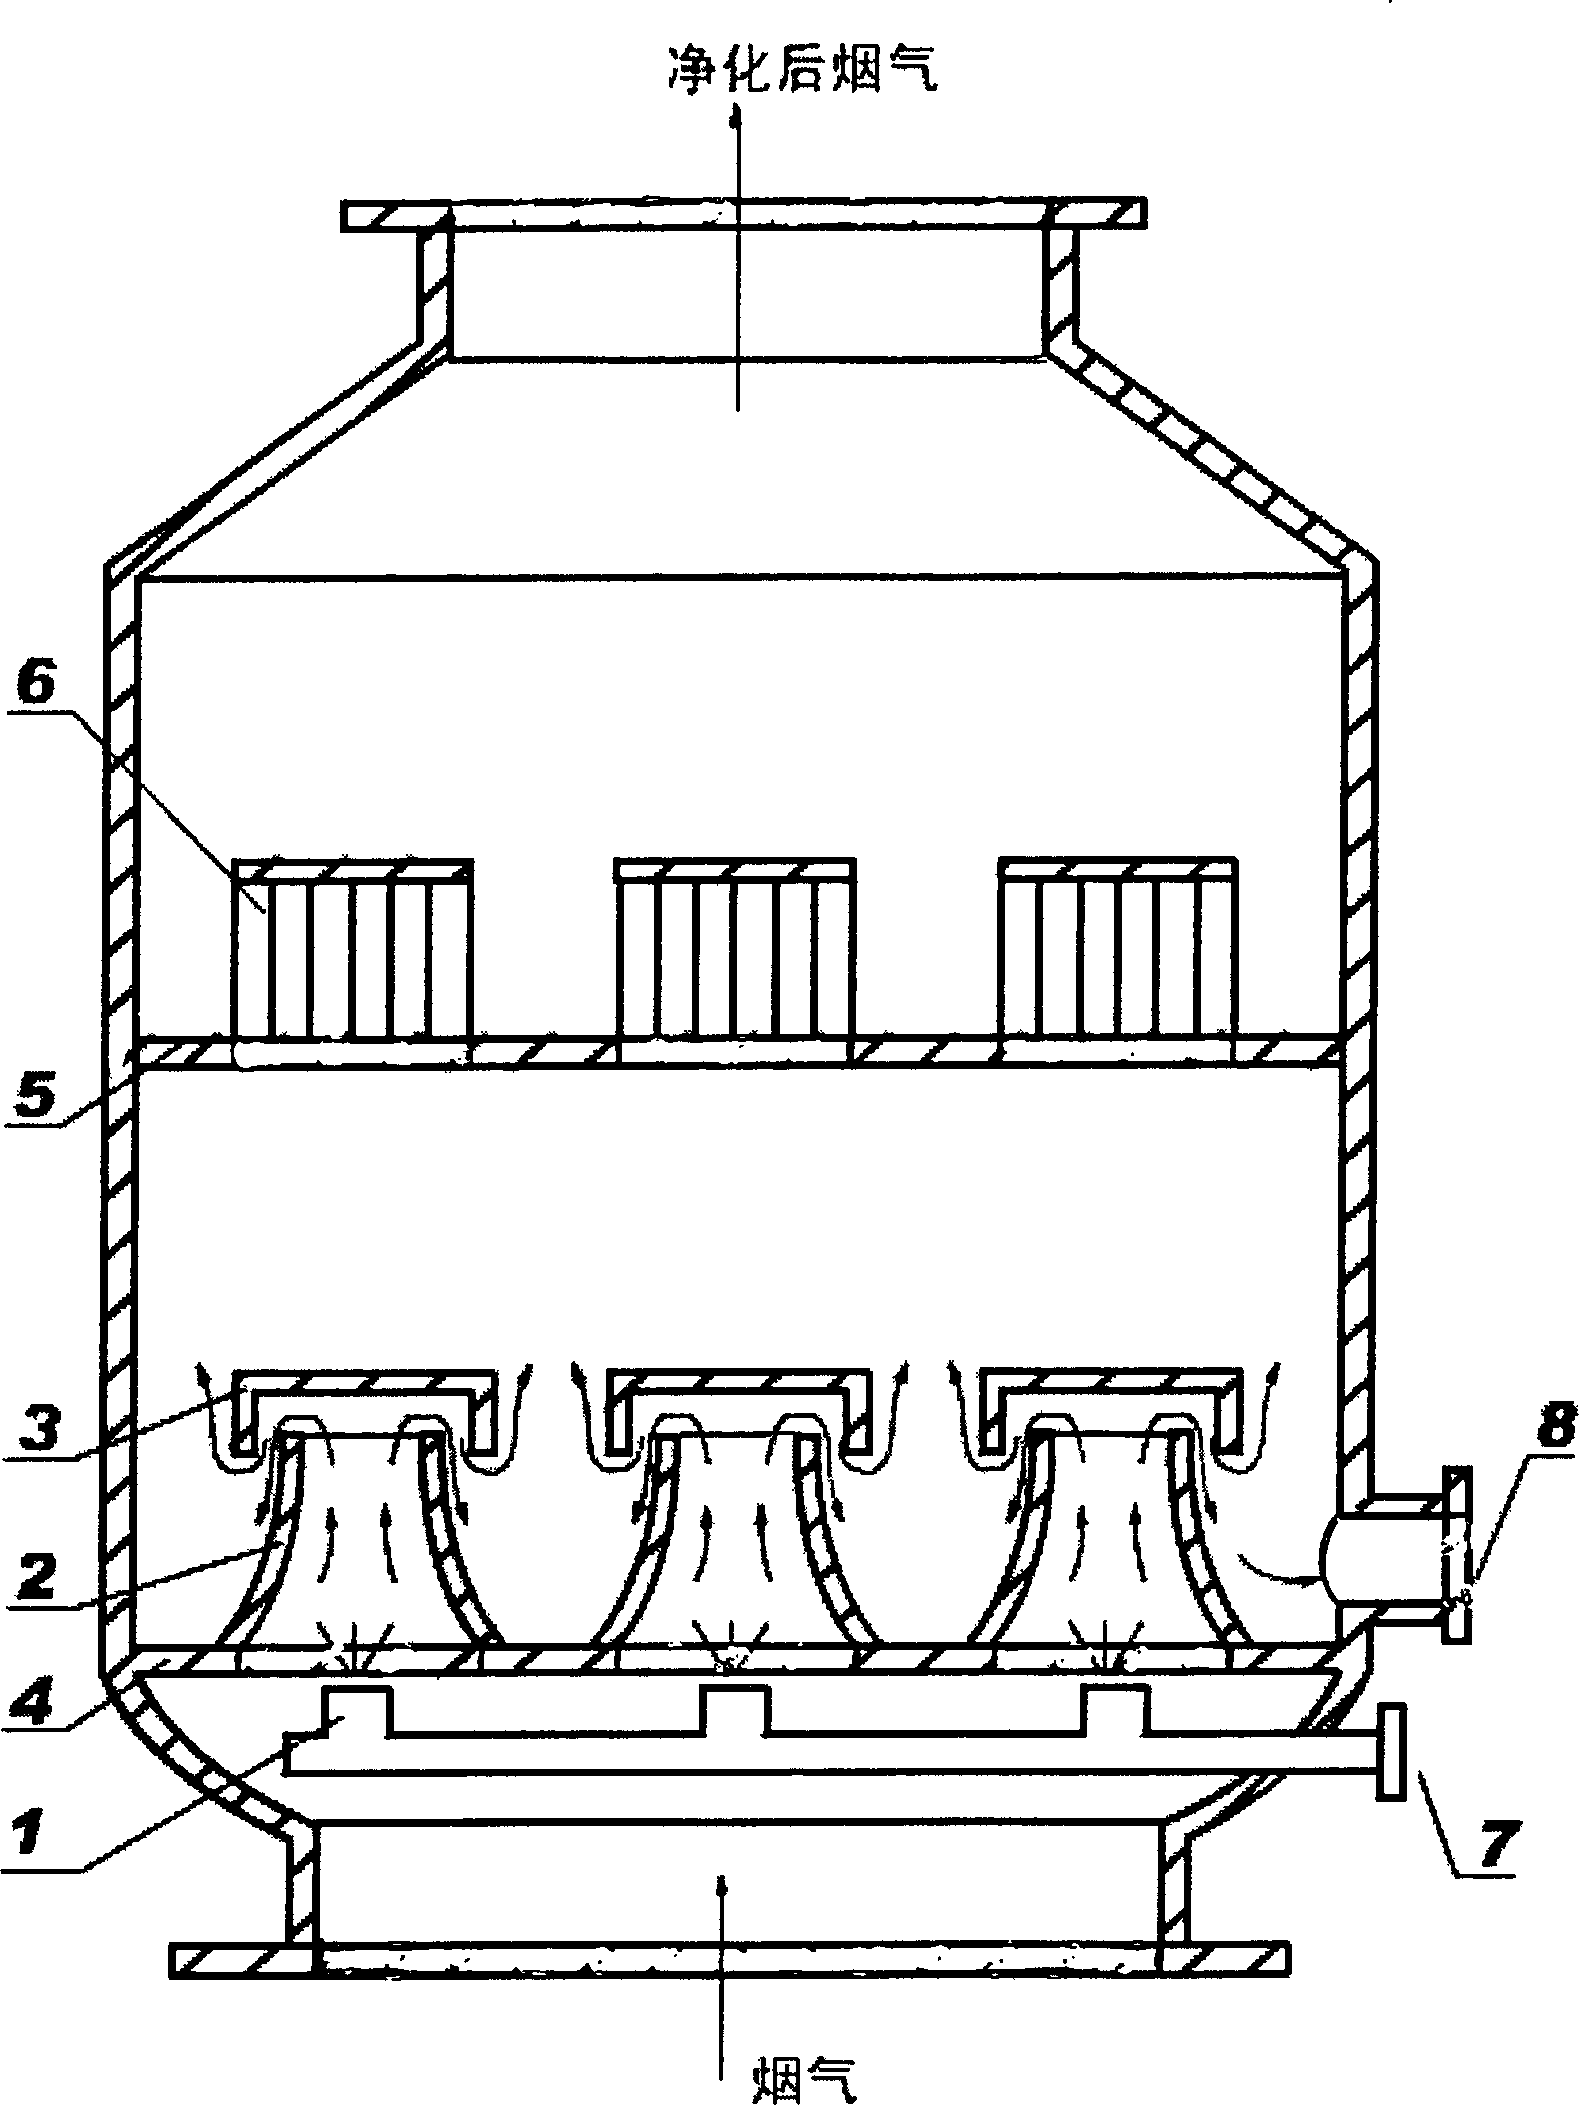 Double stage desulfurizing and dedusting apparatus